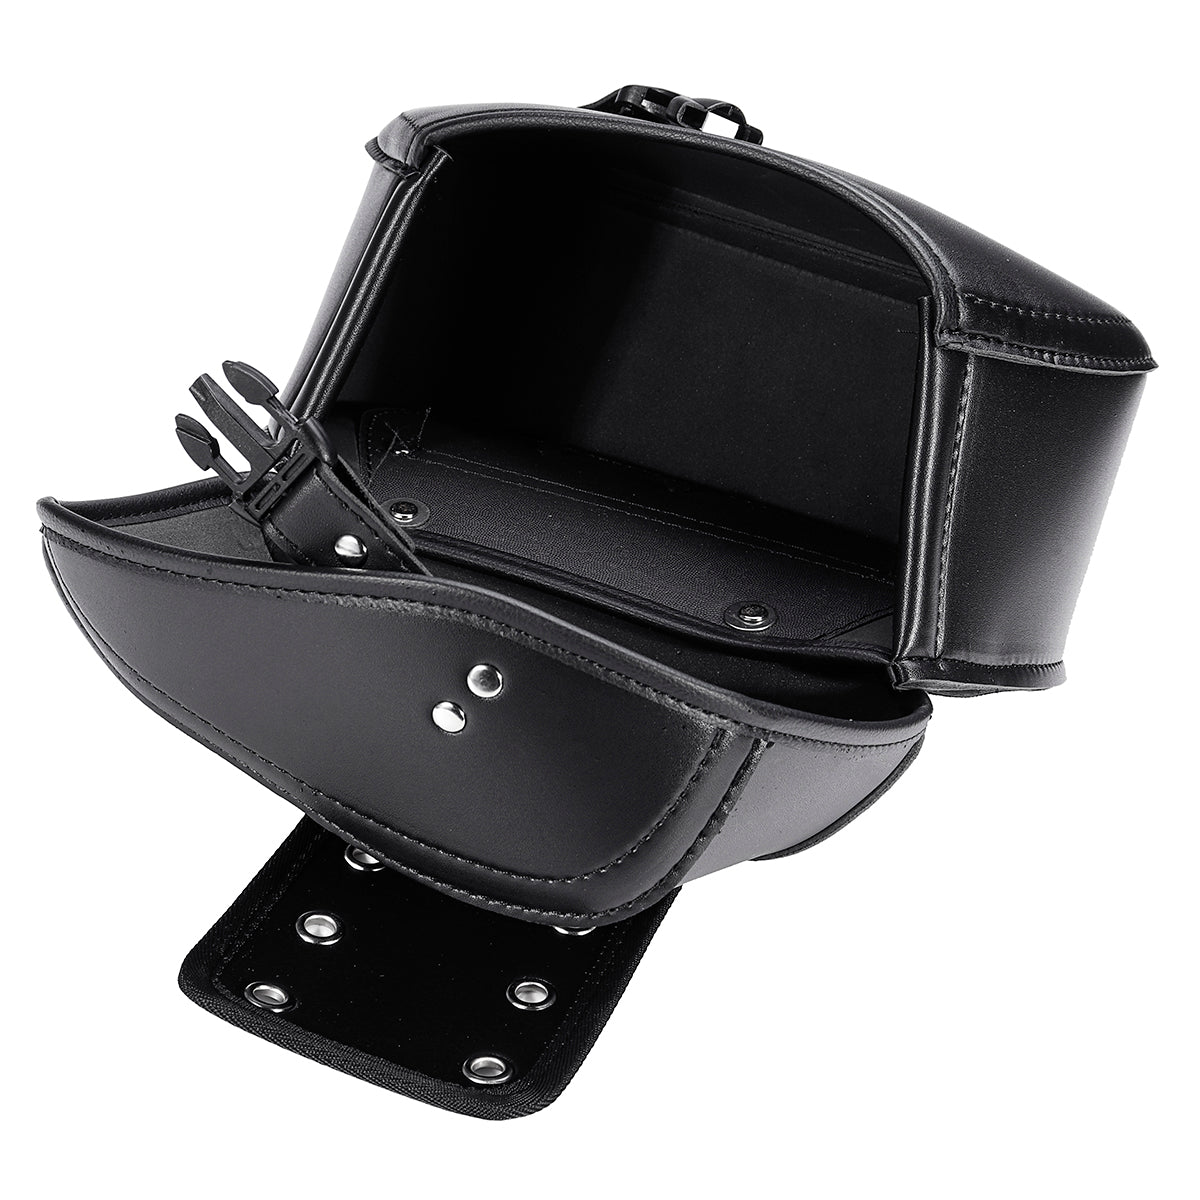 Black Universal Motorcycle PU Leather Small Saddlebags Side Storage Tool Bag For Harley